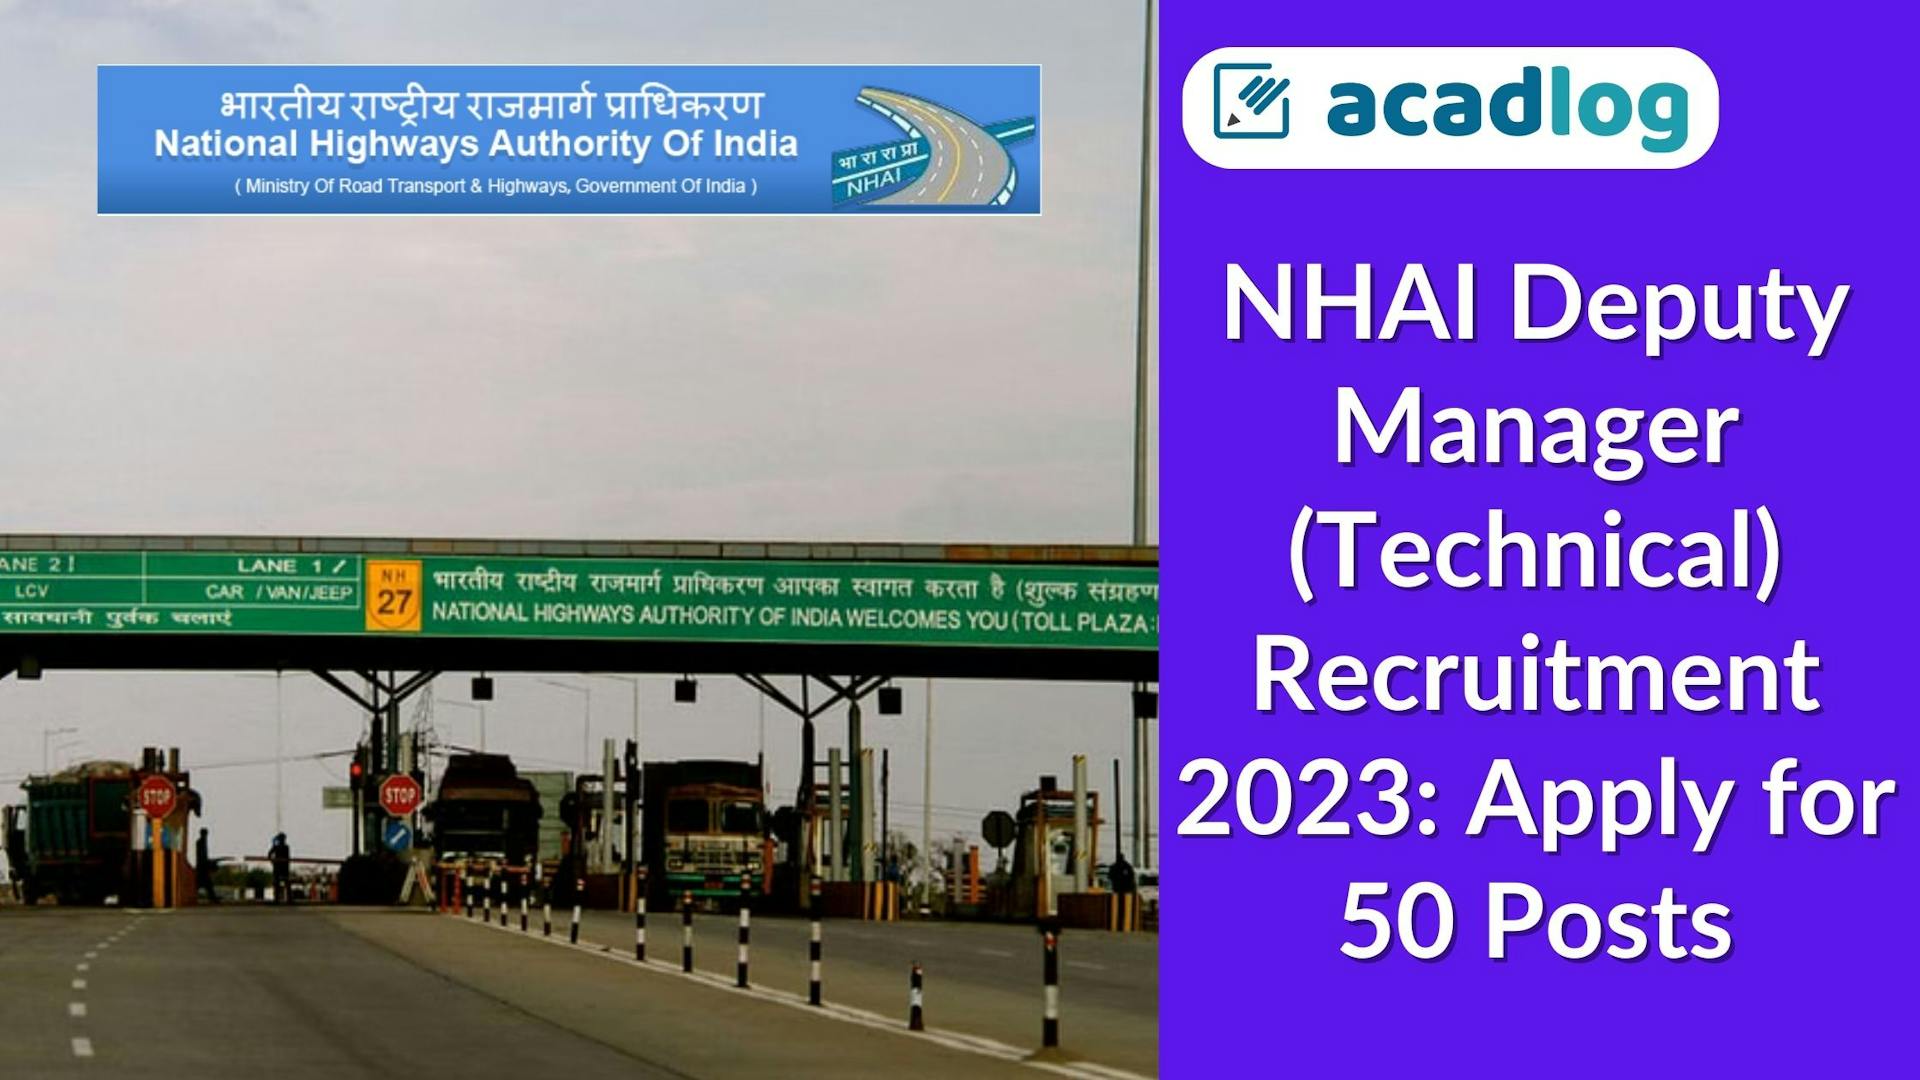 NHAI Deputy Manager (Technical) Recruitment 2023: Apply for 50 Posts